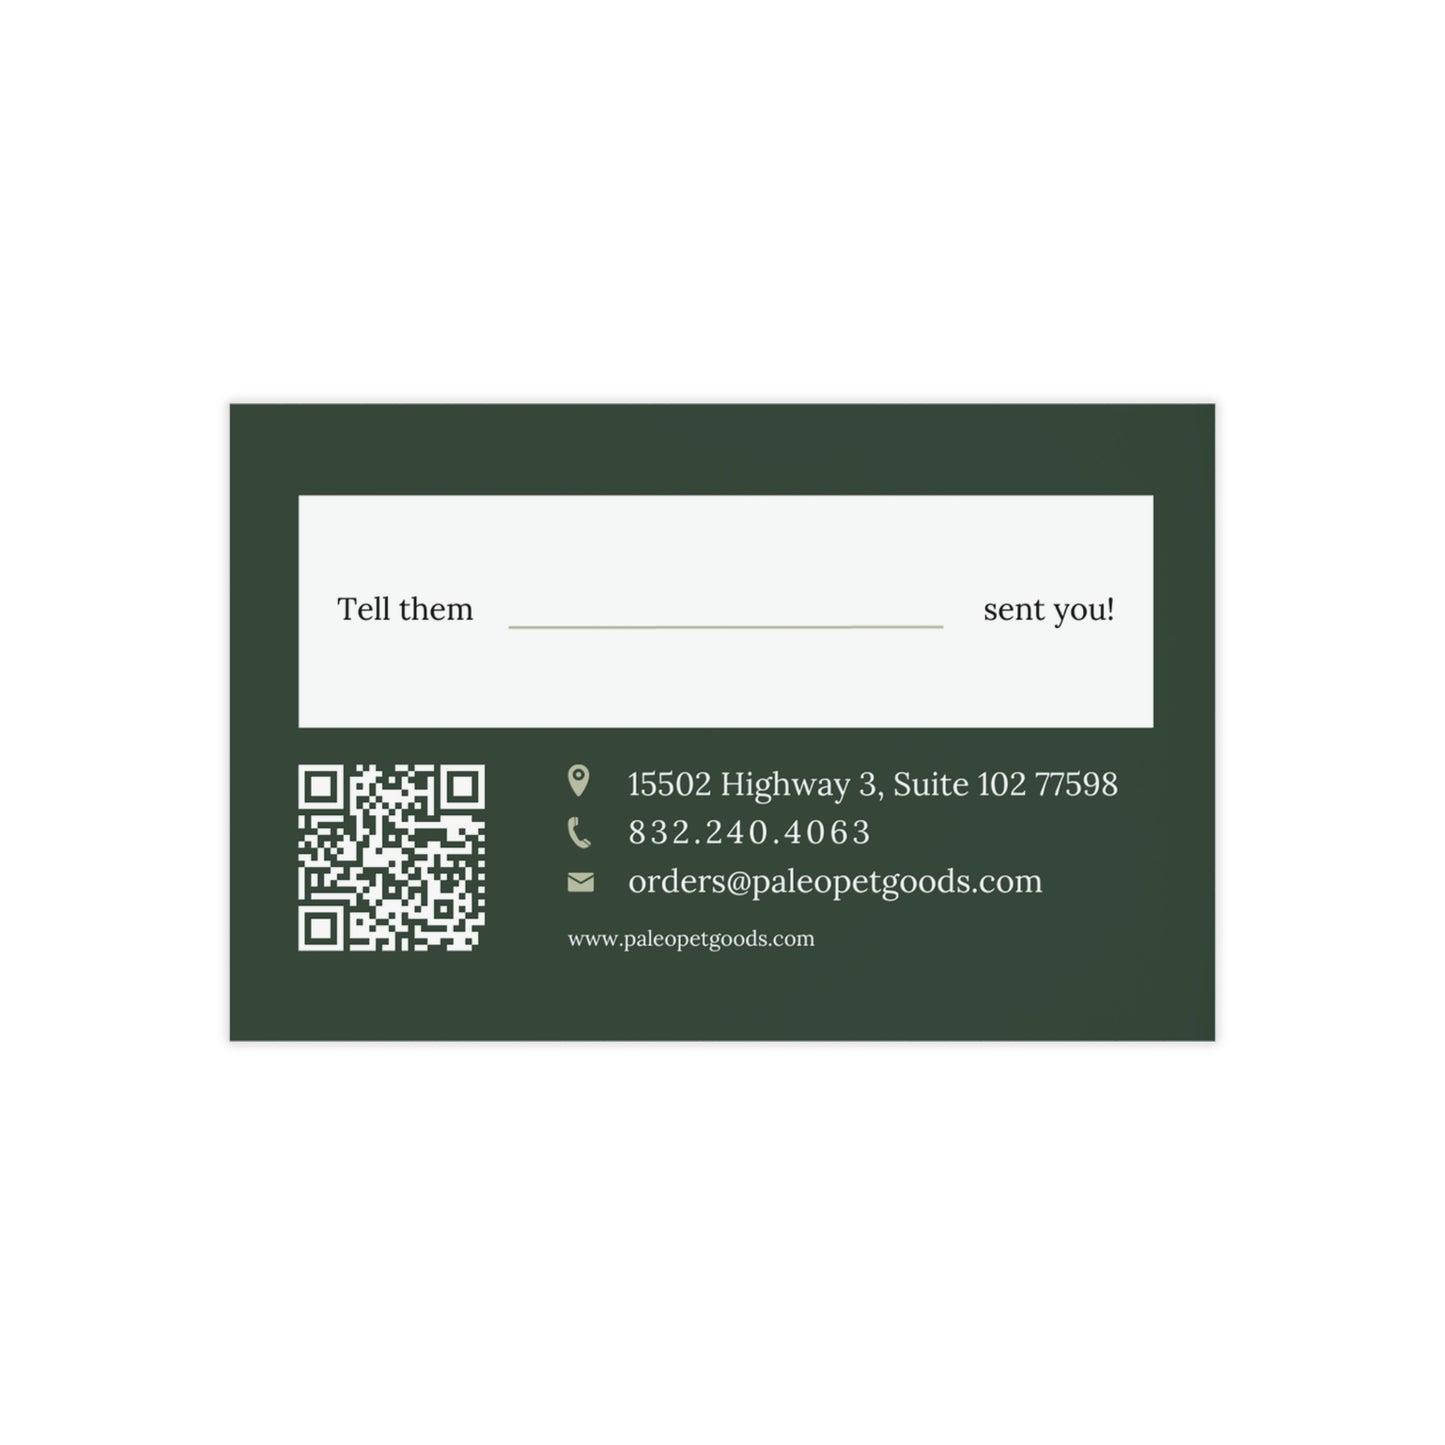 Paleo Pet Goods- Business Card with Referral (100pcs)